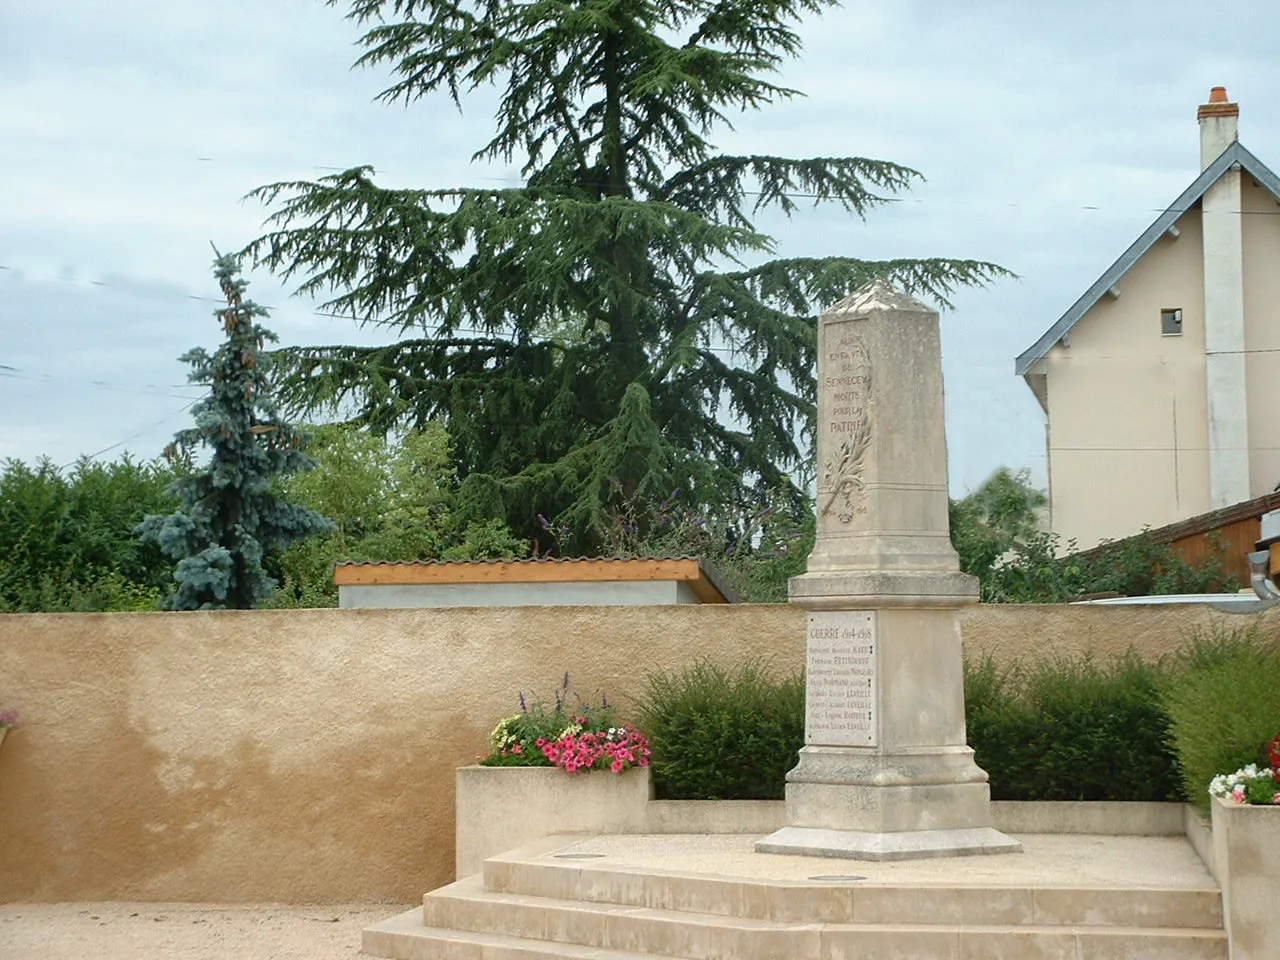 Photo showing: This is the commemorative monument of the both world war.
It takes place in front of the municipal building.